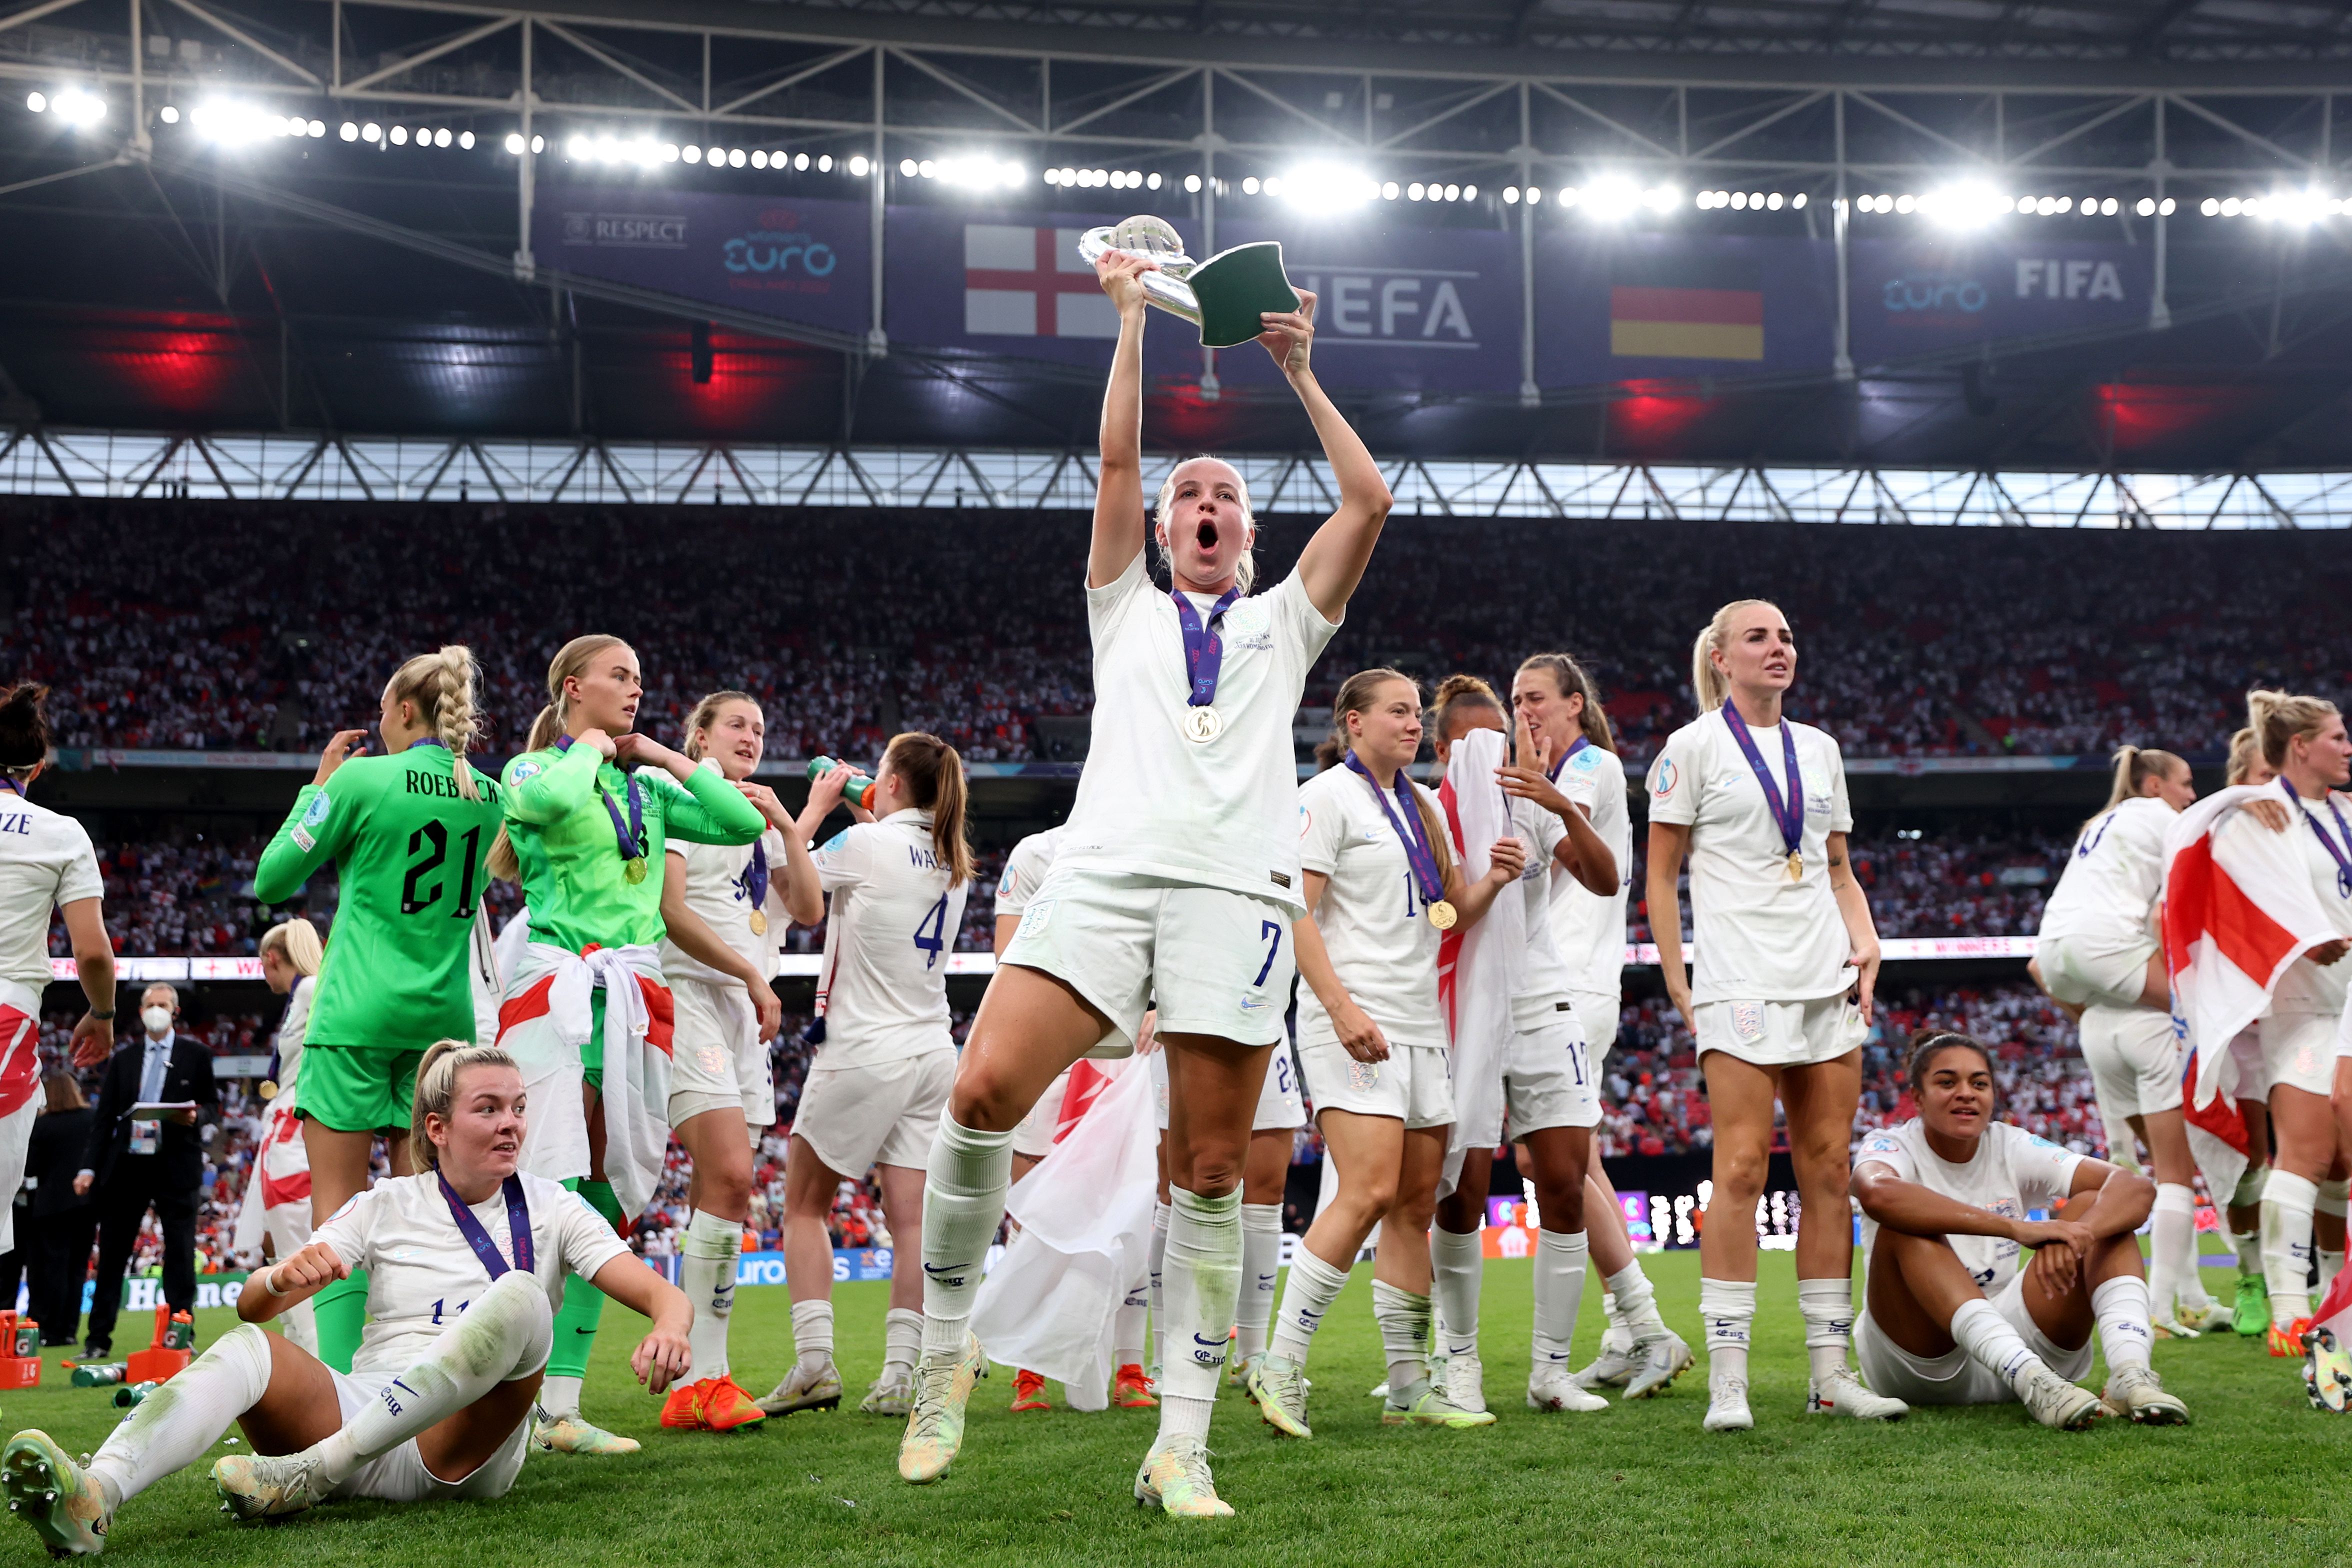 Beth Mead of England celebrates with the trophy during the UEFA Women's Euro 2022 final match between England and Germany at Wembley Stadium on July 31, 2022 in London, England.